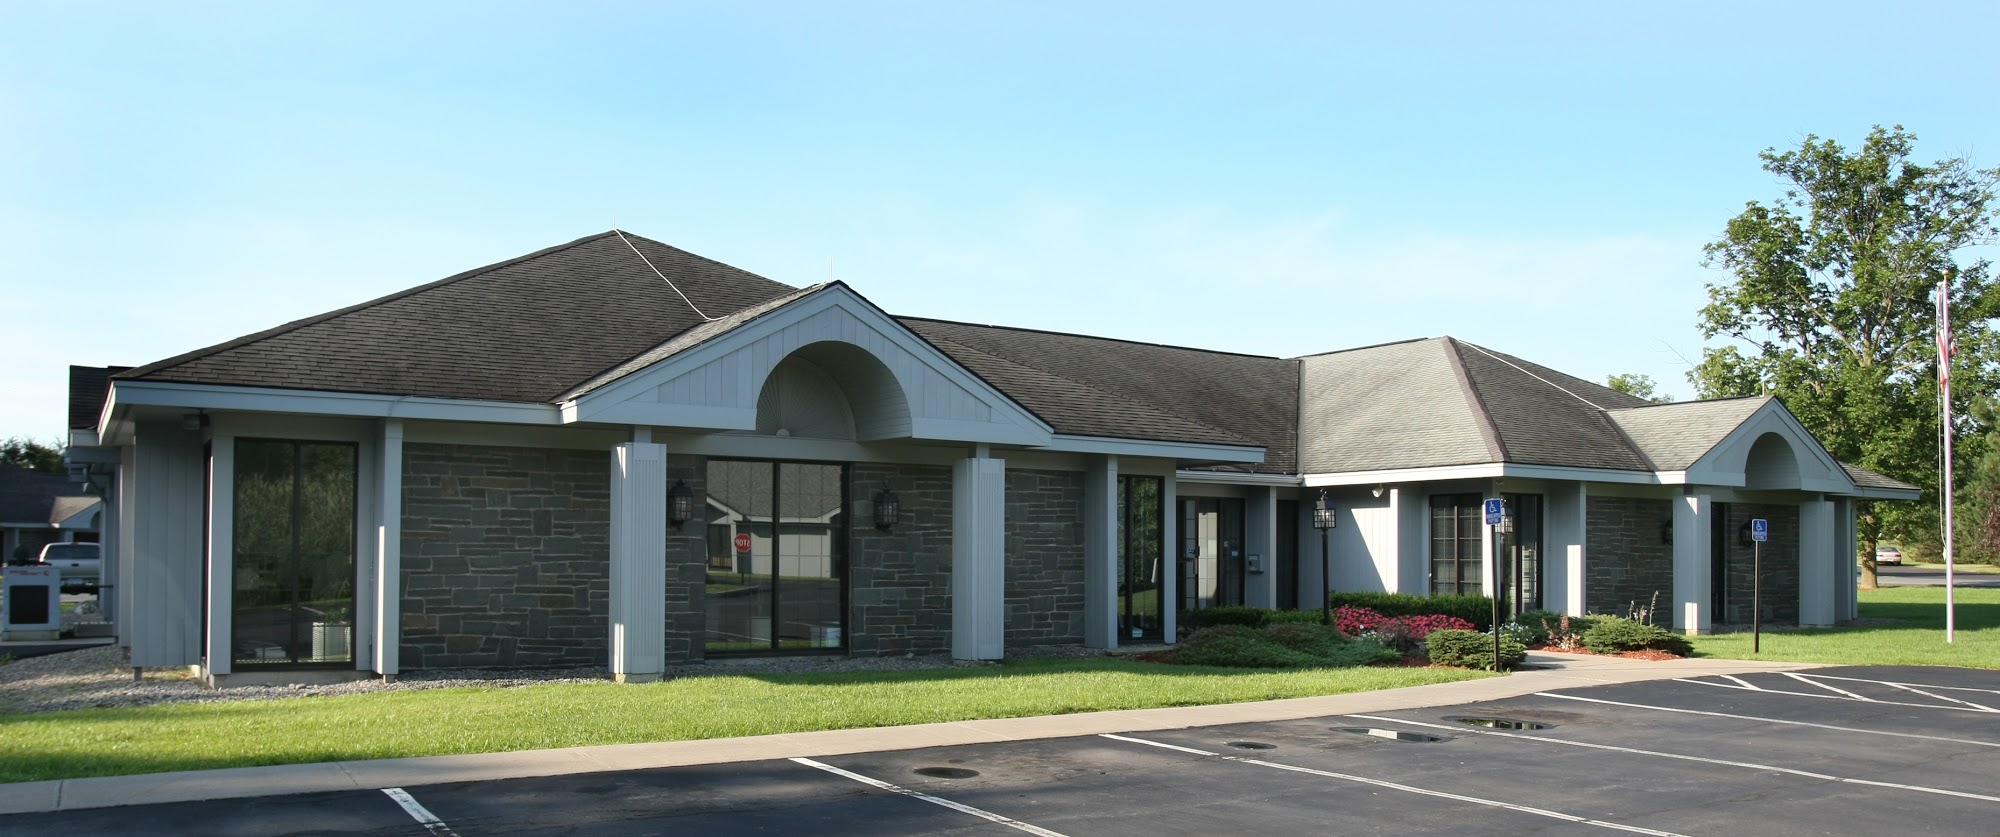 Countryside Federal Credit Union